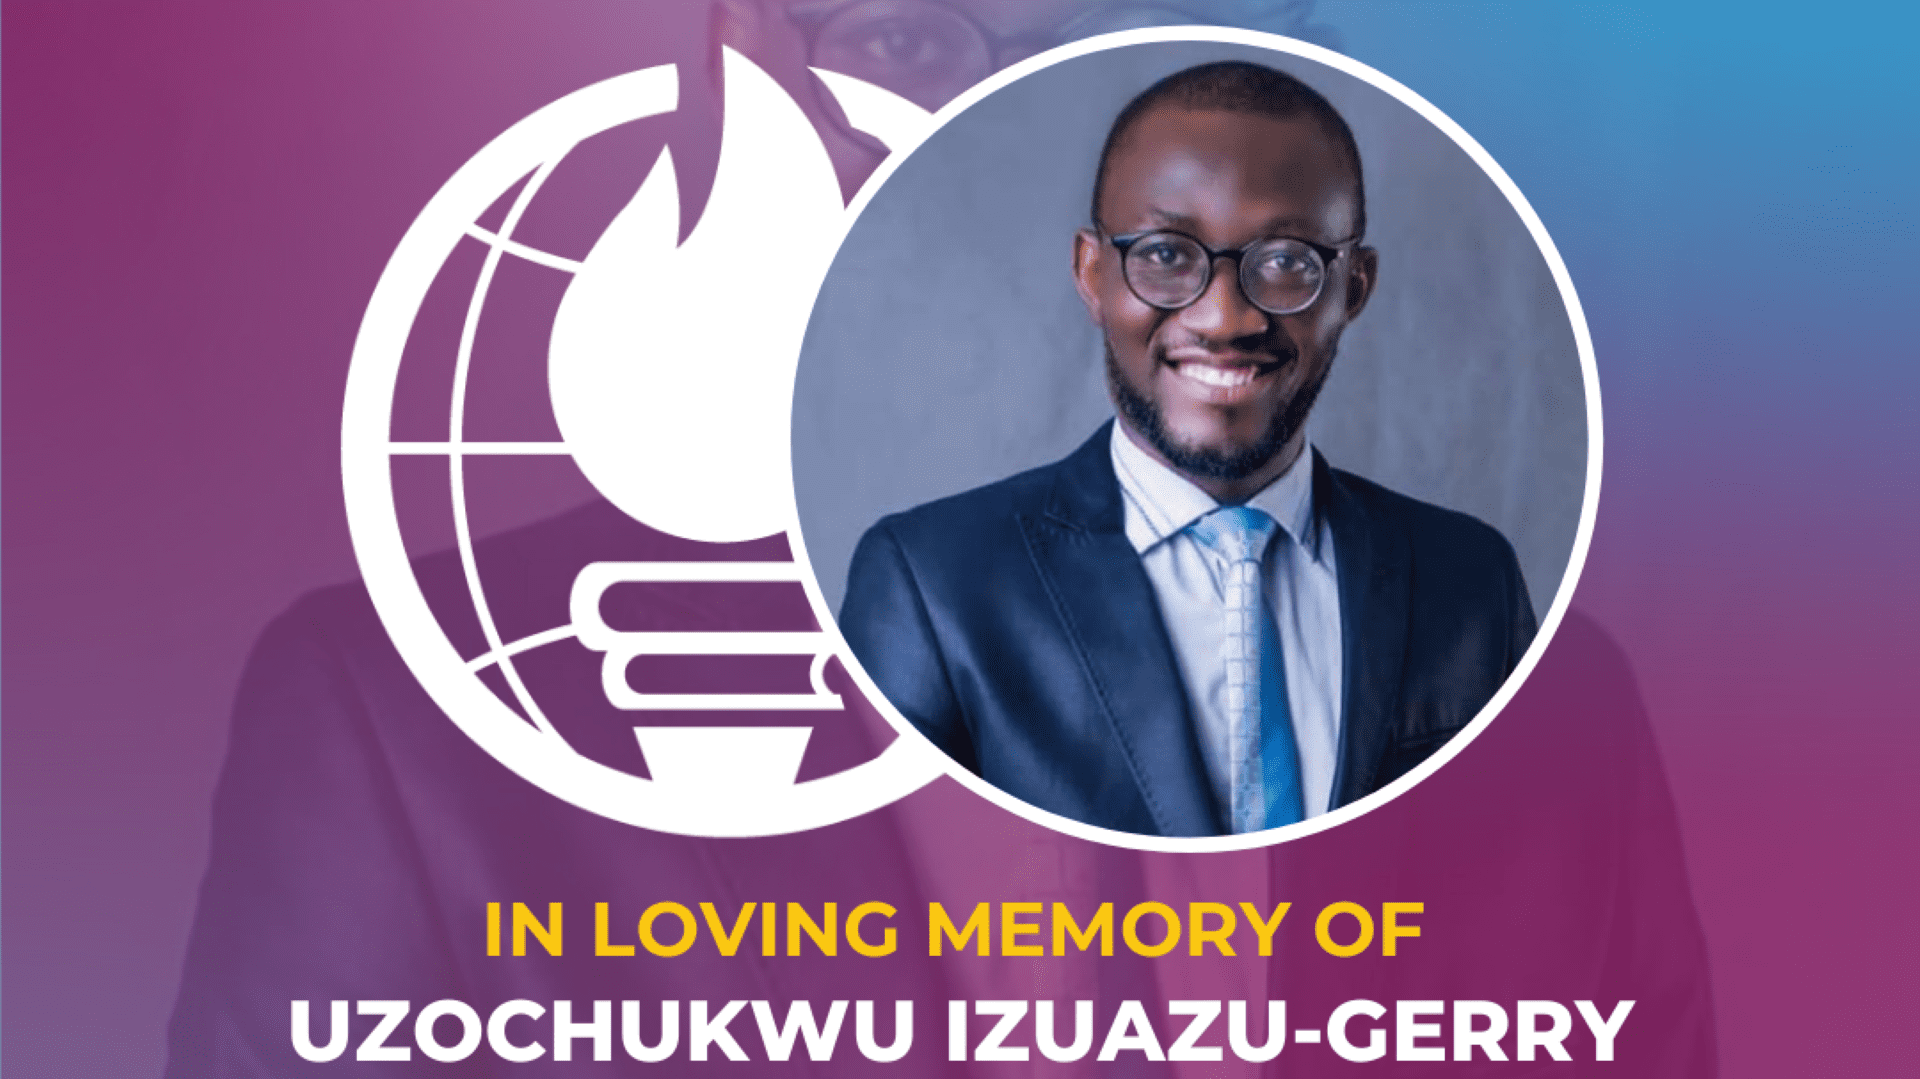 All of us at Students For Liberty are saddened by the death of student volunteer and Regional Coordinator, Uzochukwu Izuazu-Gerry.